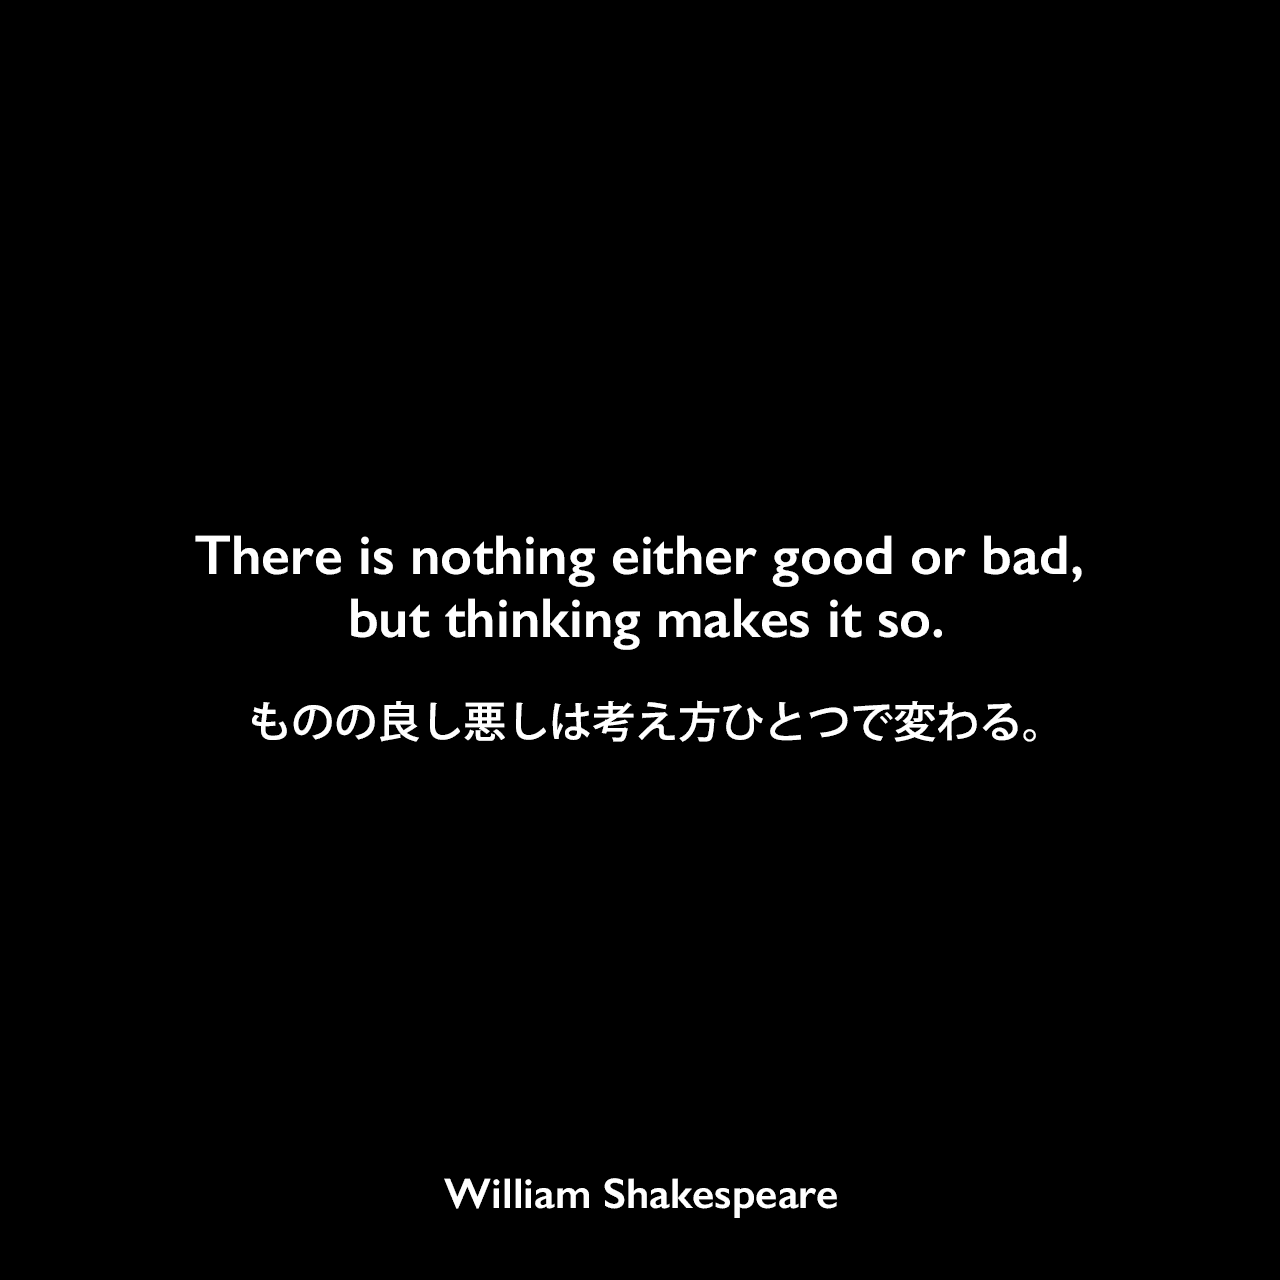 There is nothing either good or bad but thinking makes it so.ものの良し悪しは考え方ひとつで変わる。William Shakespeare